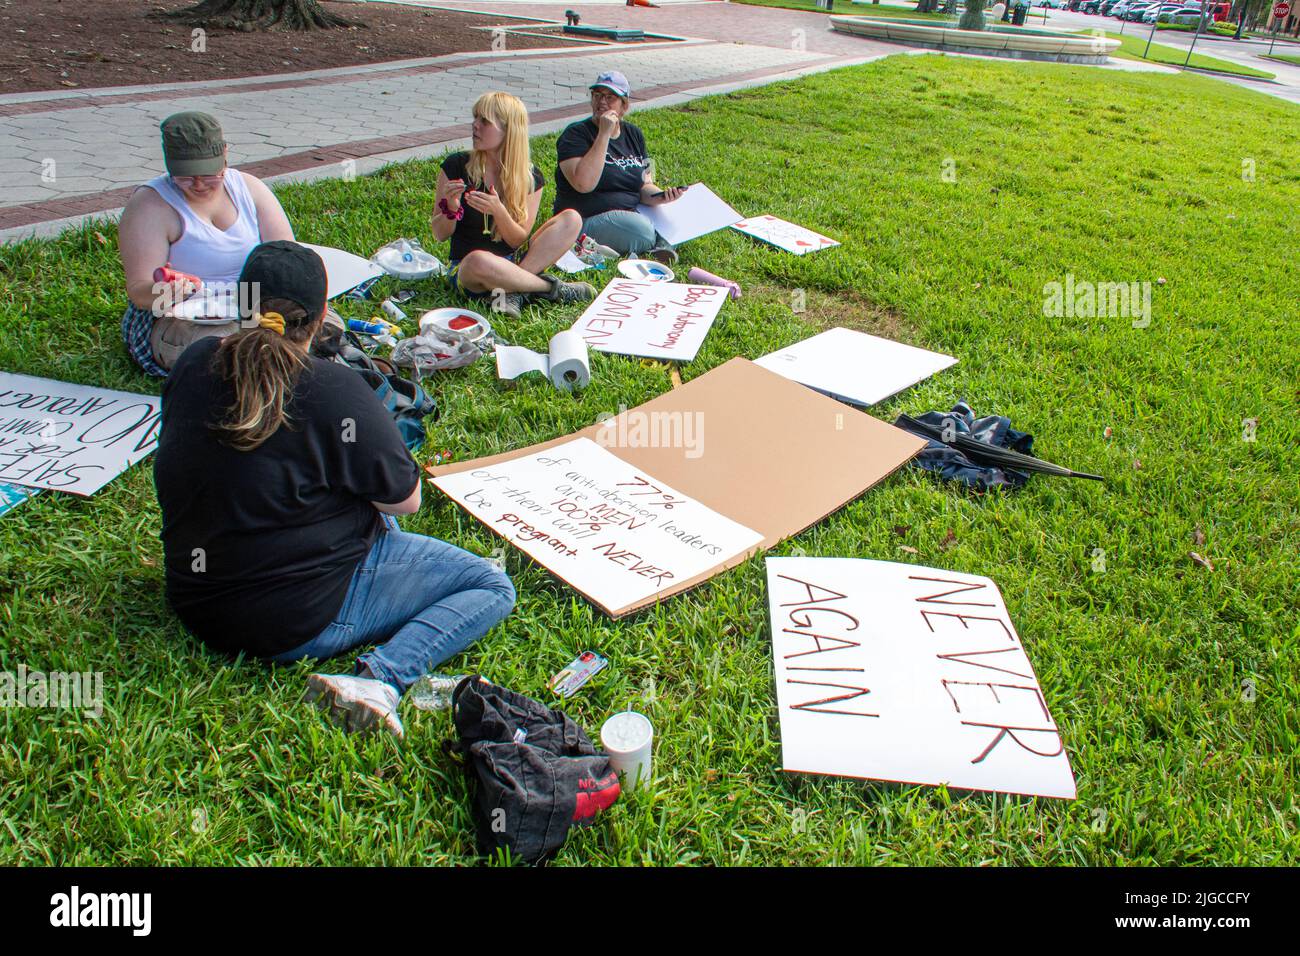 Young pro-abortion activists are preparing their placards for the demonstration march against restrictions imposed in many states. Stock Photo